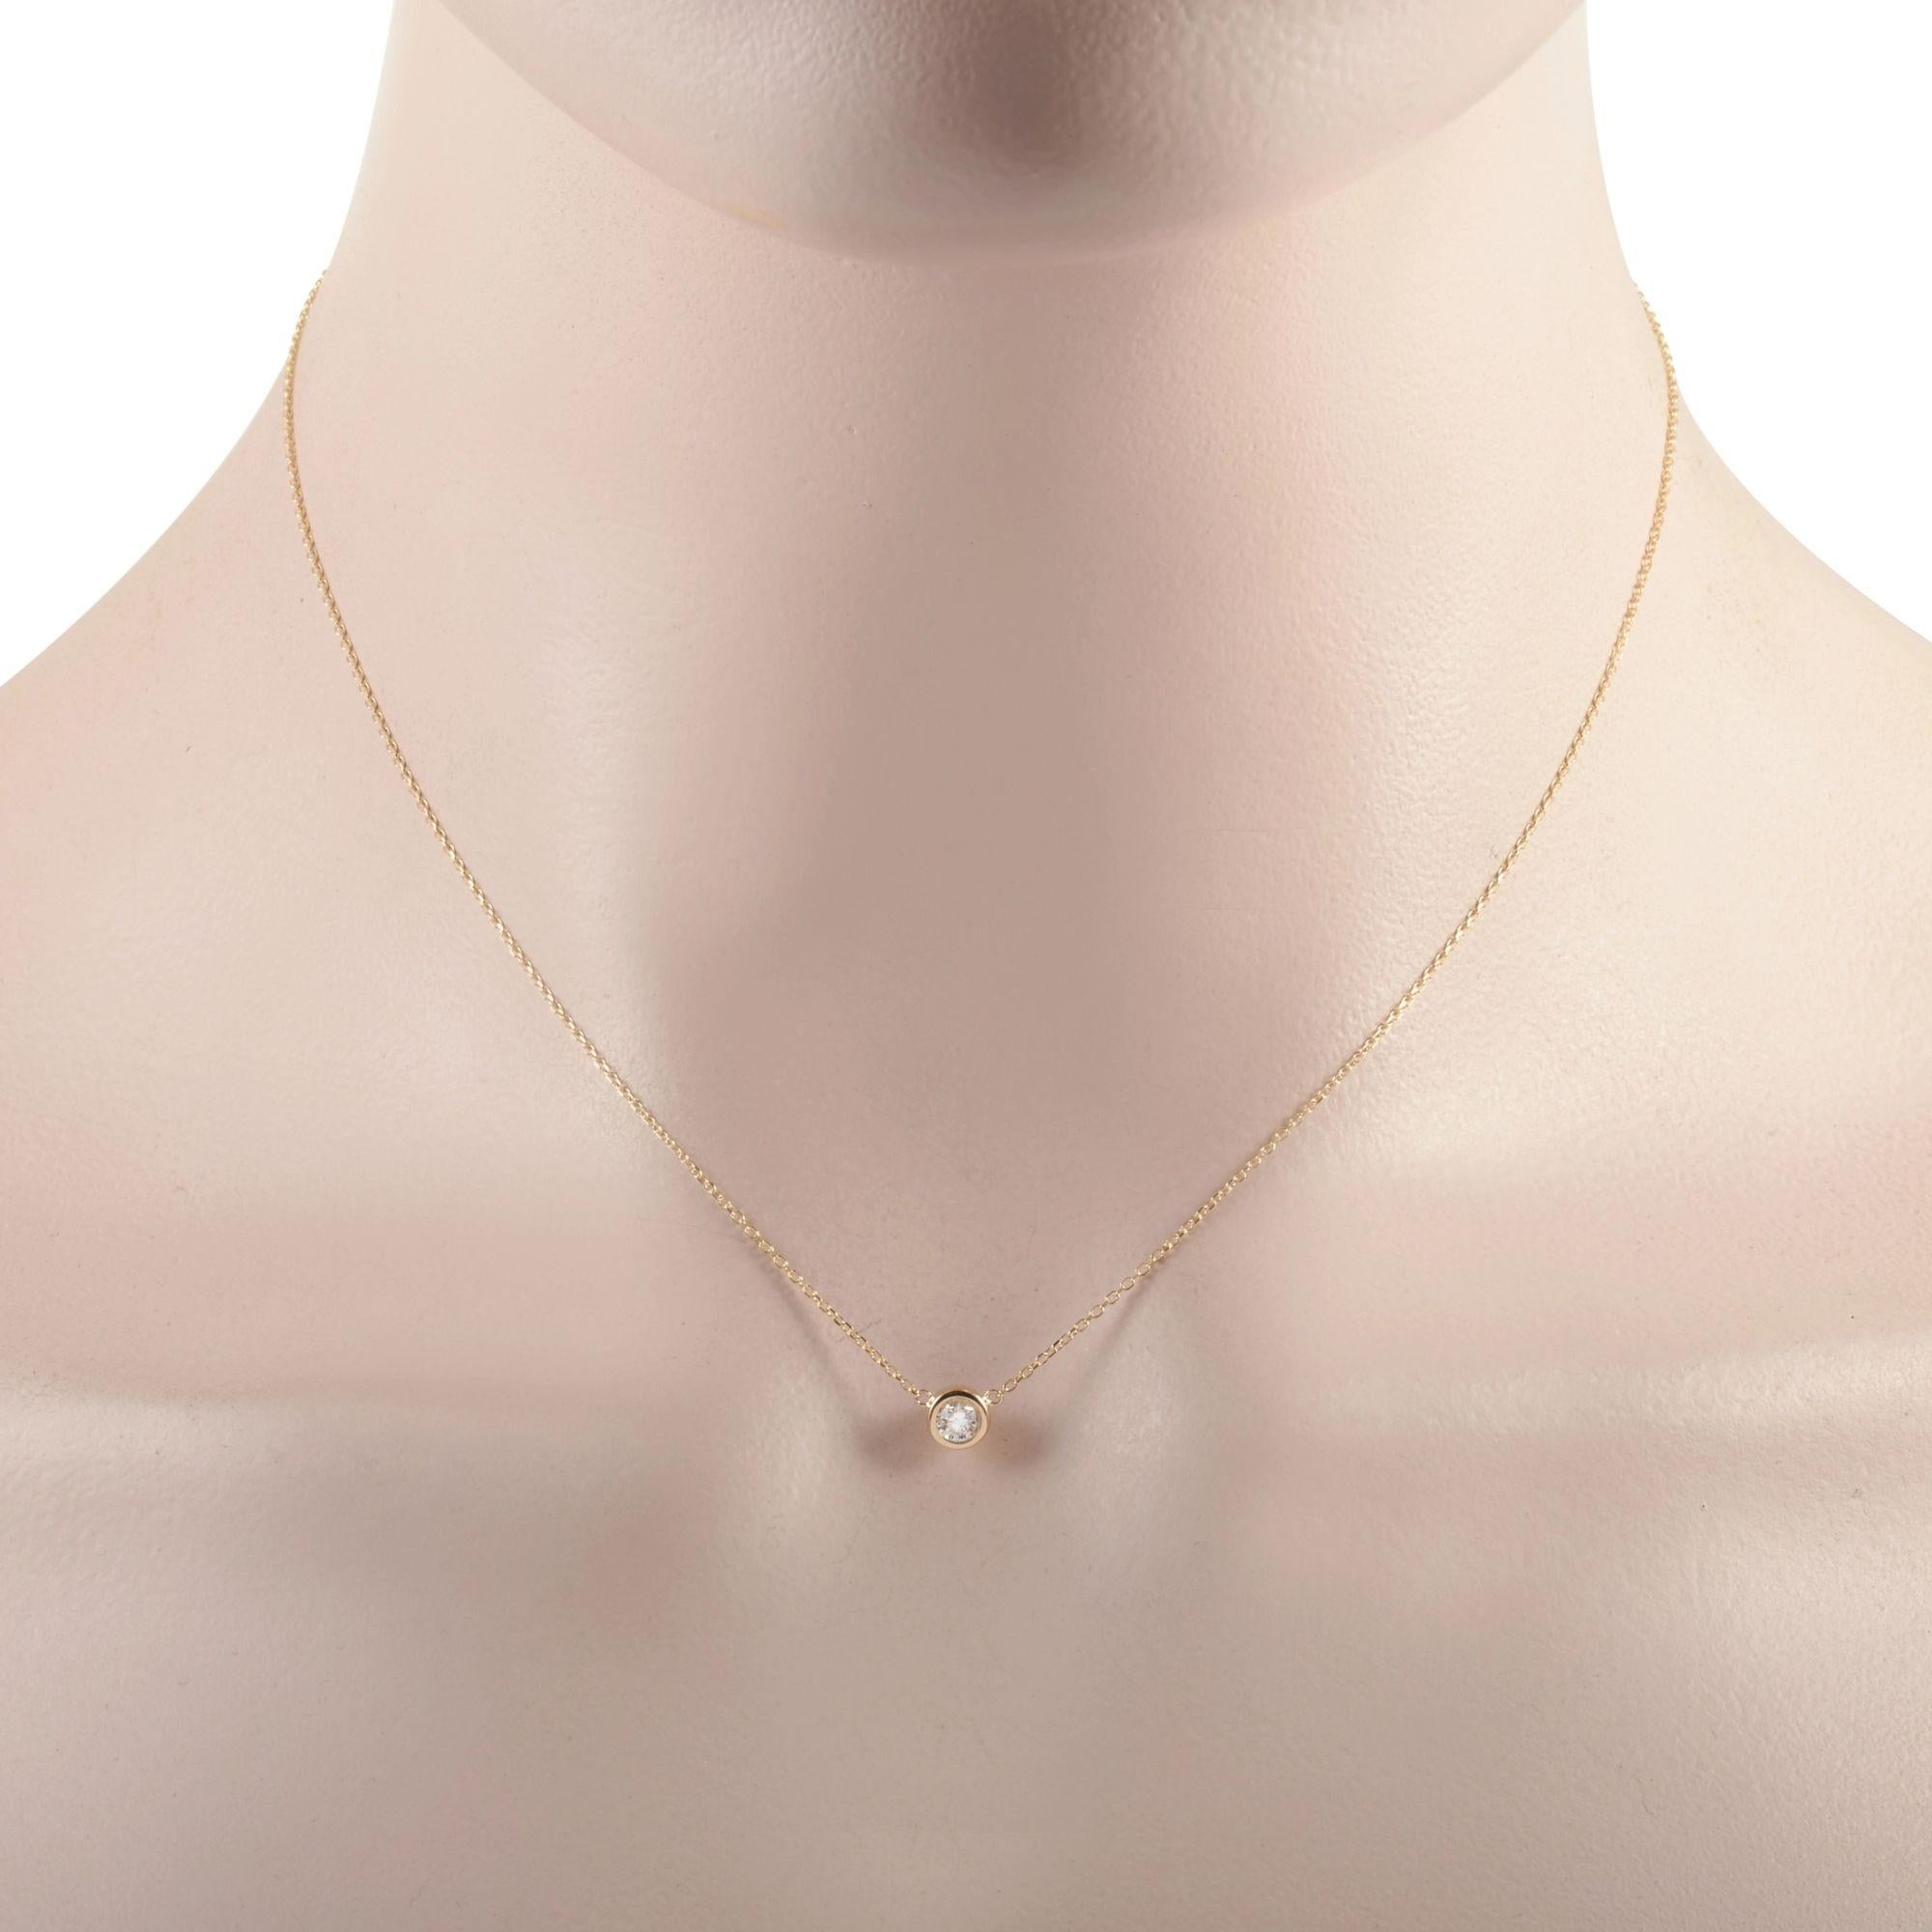 This LB Exclusive necklace is made of 14K yellow gold and embellished with a 0.20 ct diamond stone. The necklace weighs 1.4 grams and boasts a 15” chain and a pendant that measures 0.15” in length and 0.15” in width.
 
 Offered in brand new